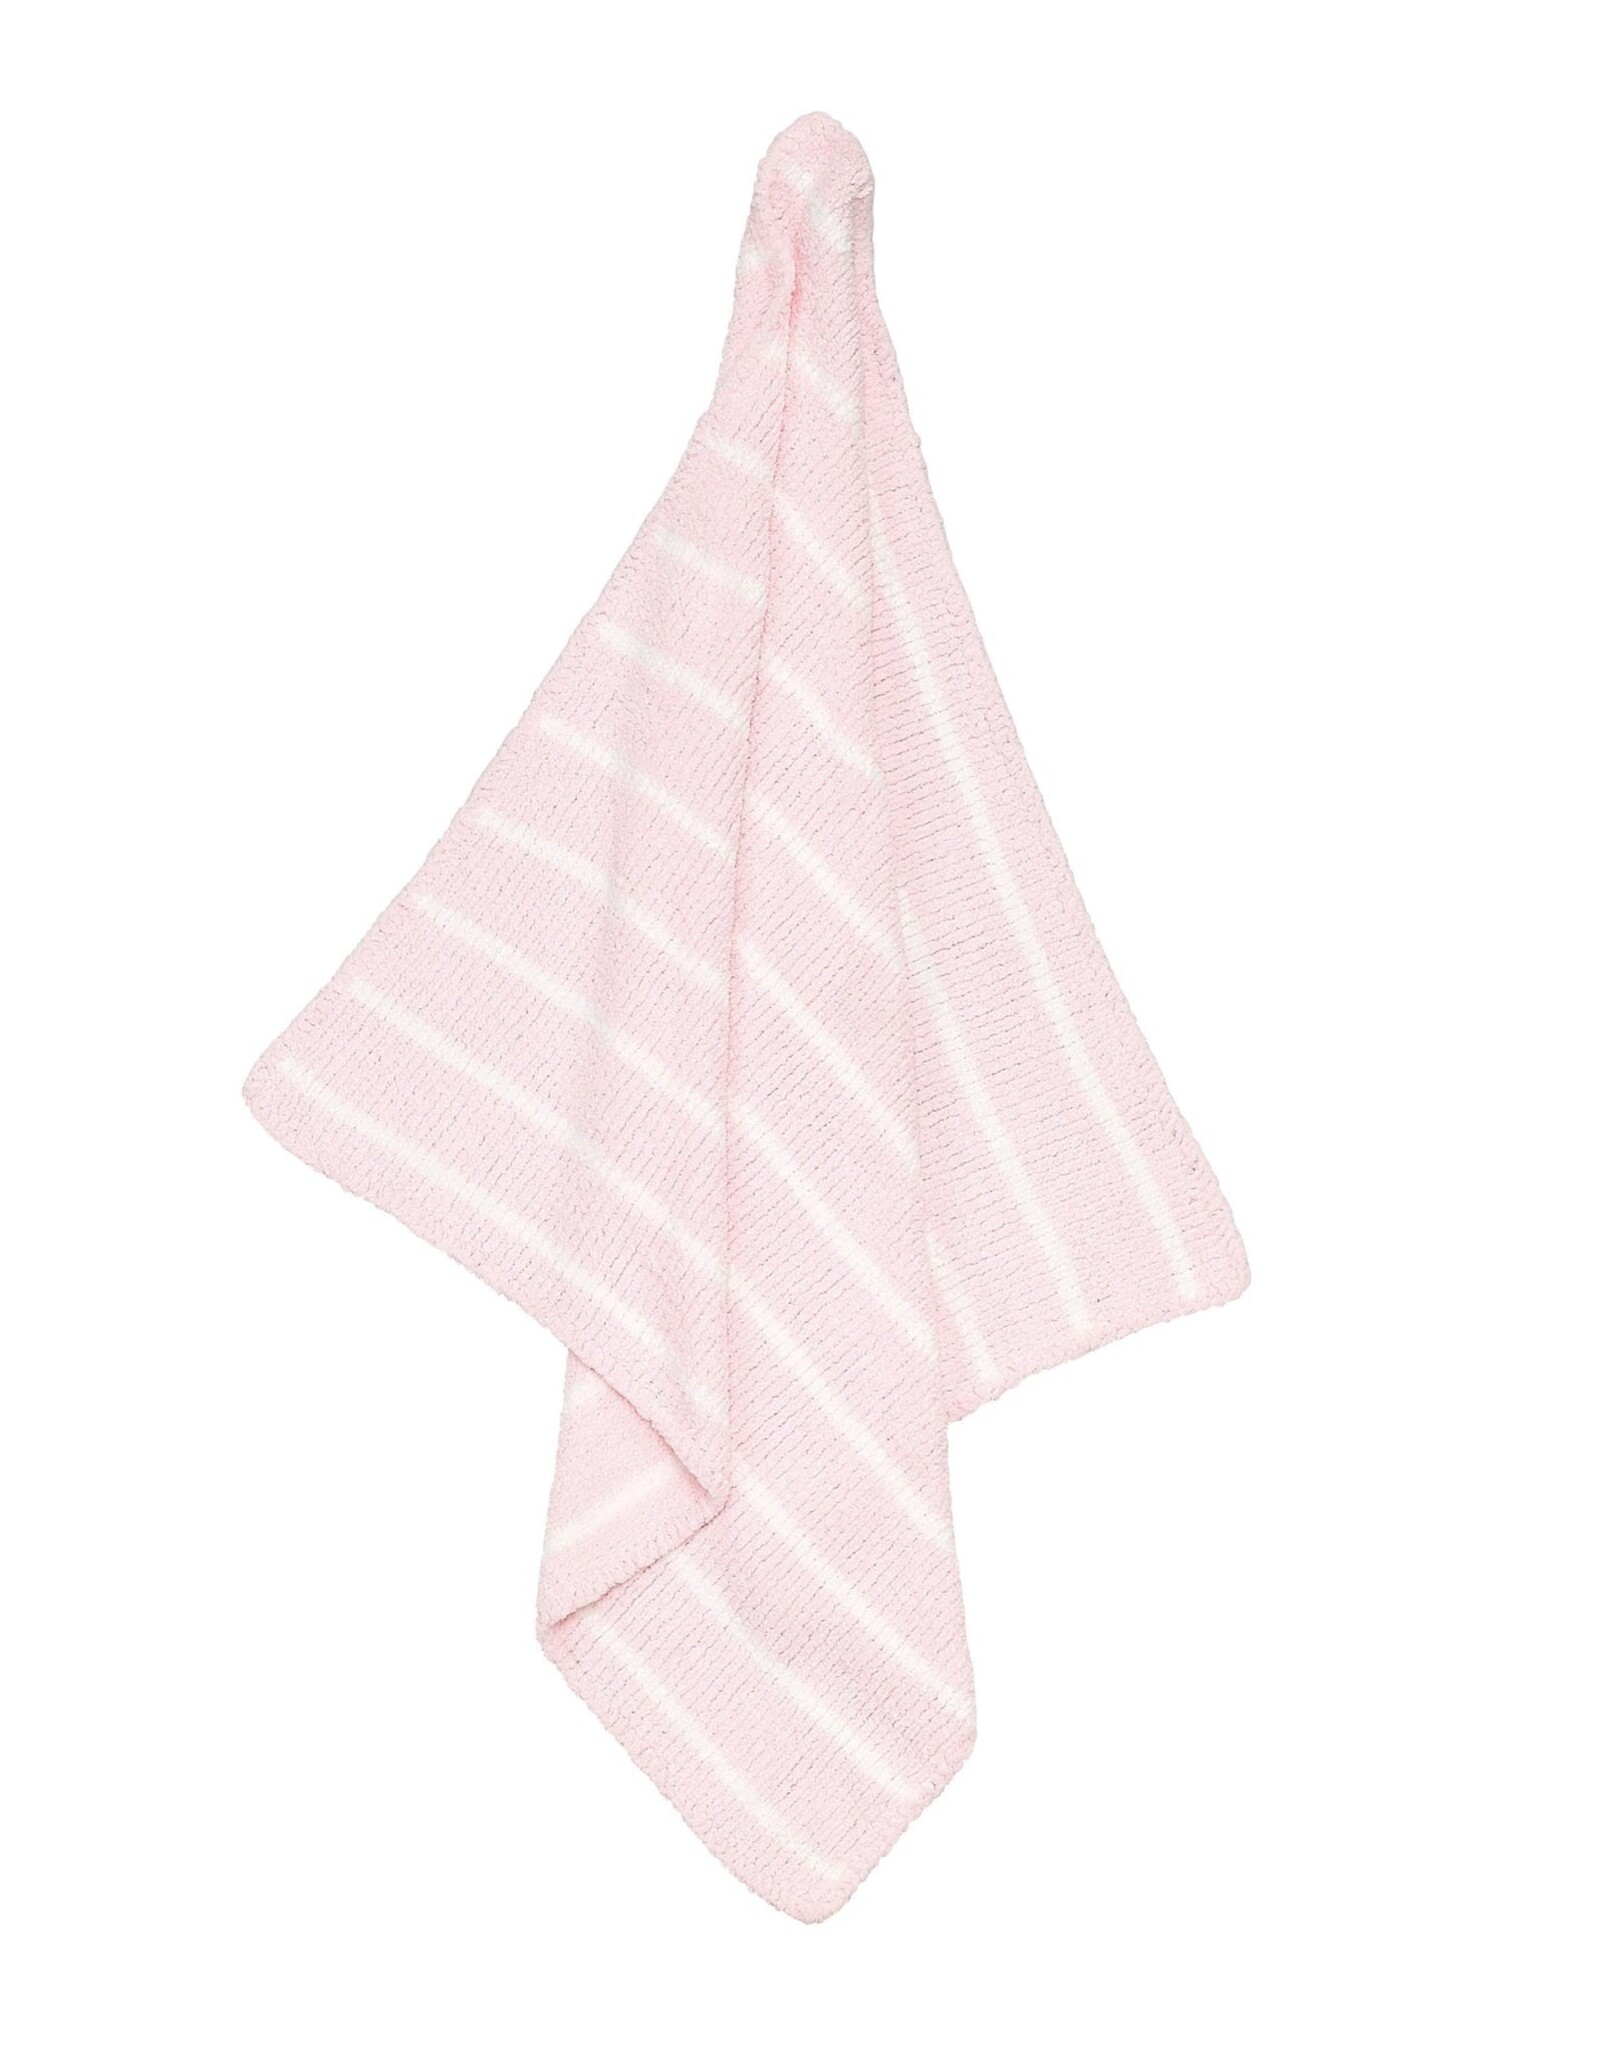 Angel Dear Chenille Blanket AD pink/ivory